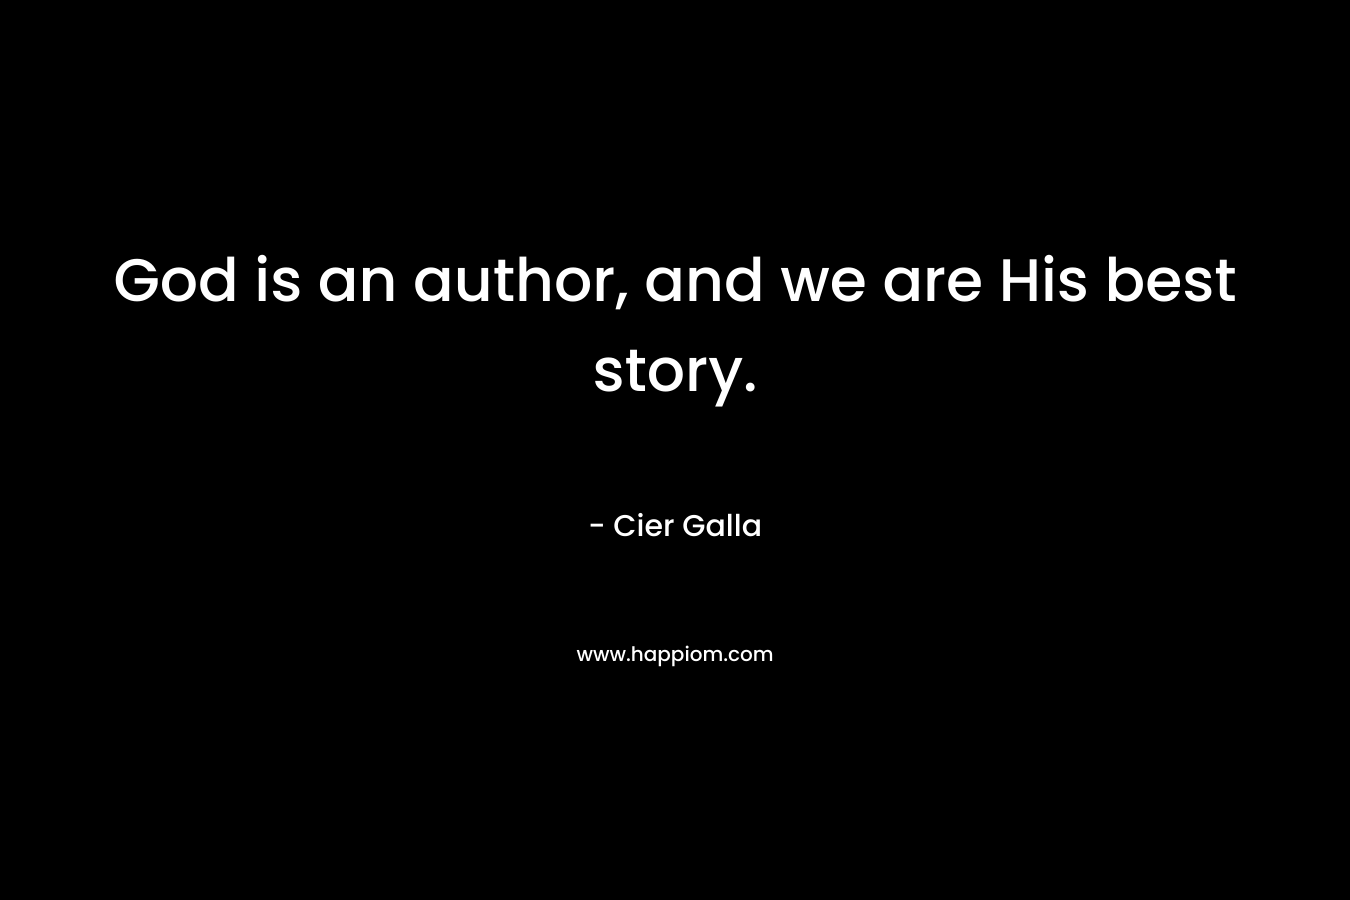 God is an author, and we are His best story. – Cier Galla